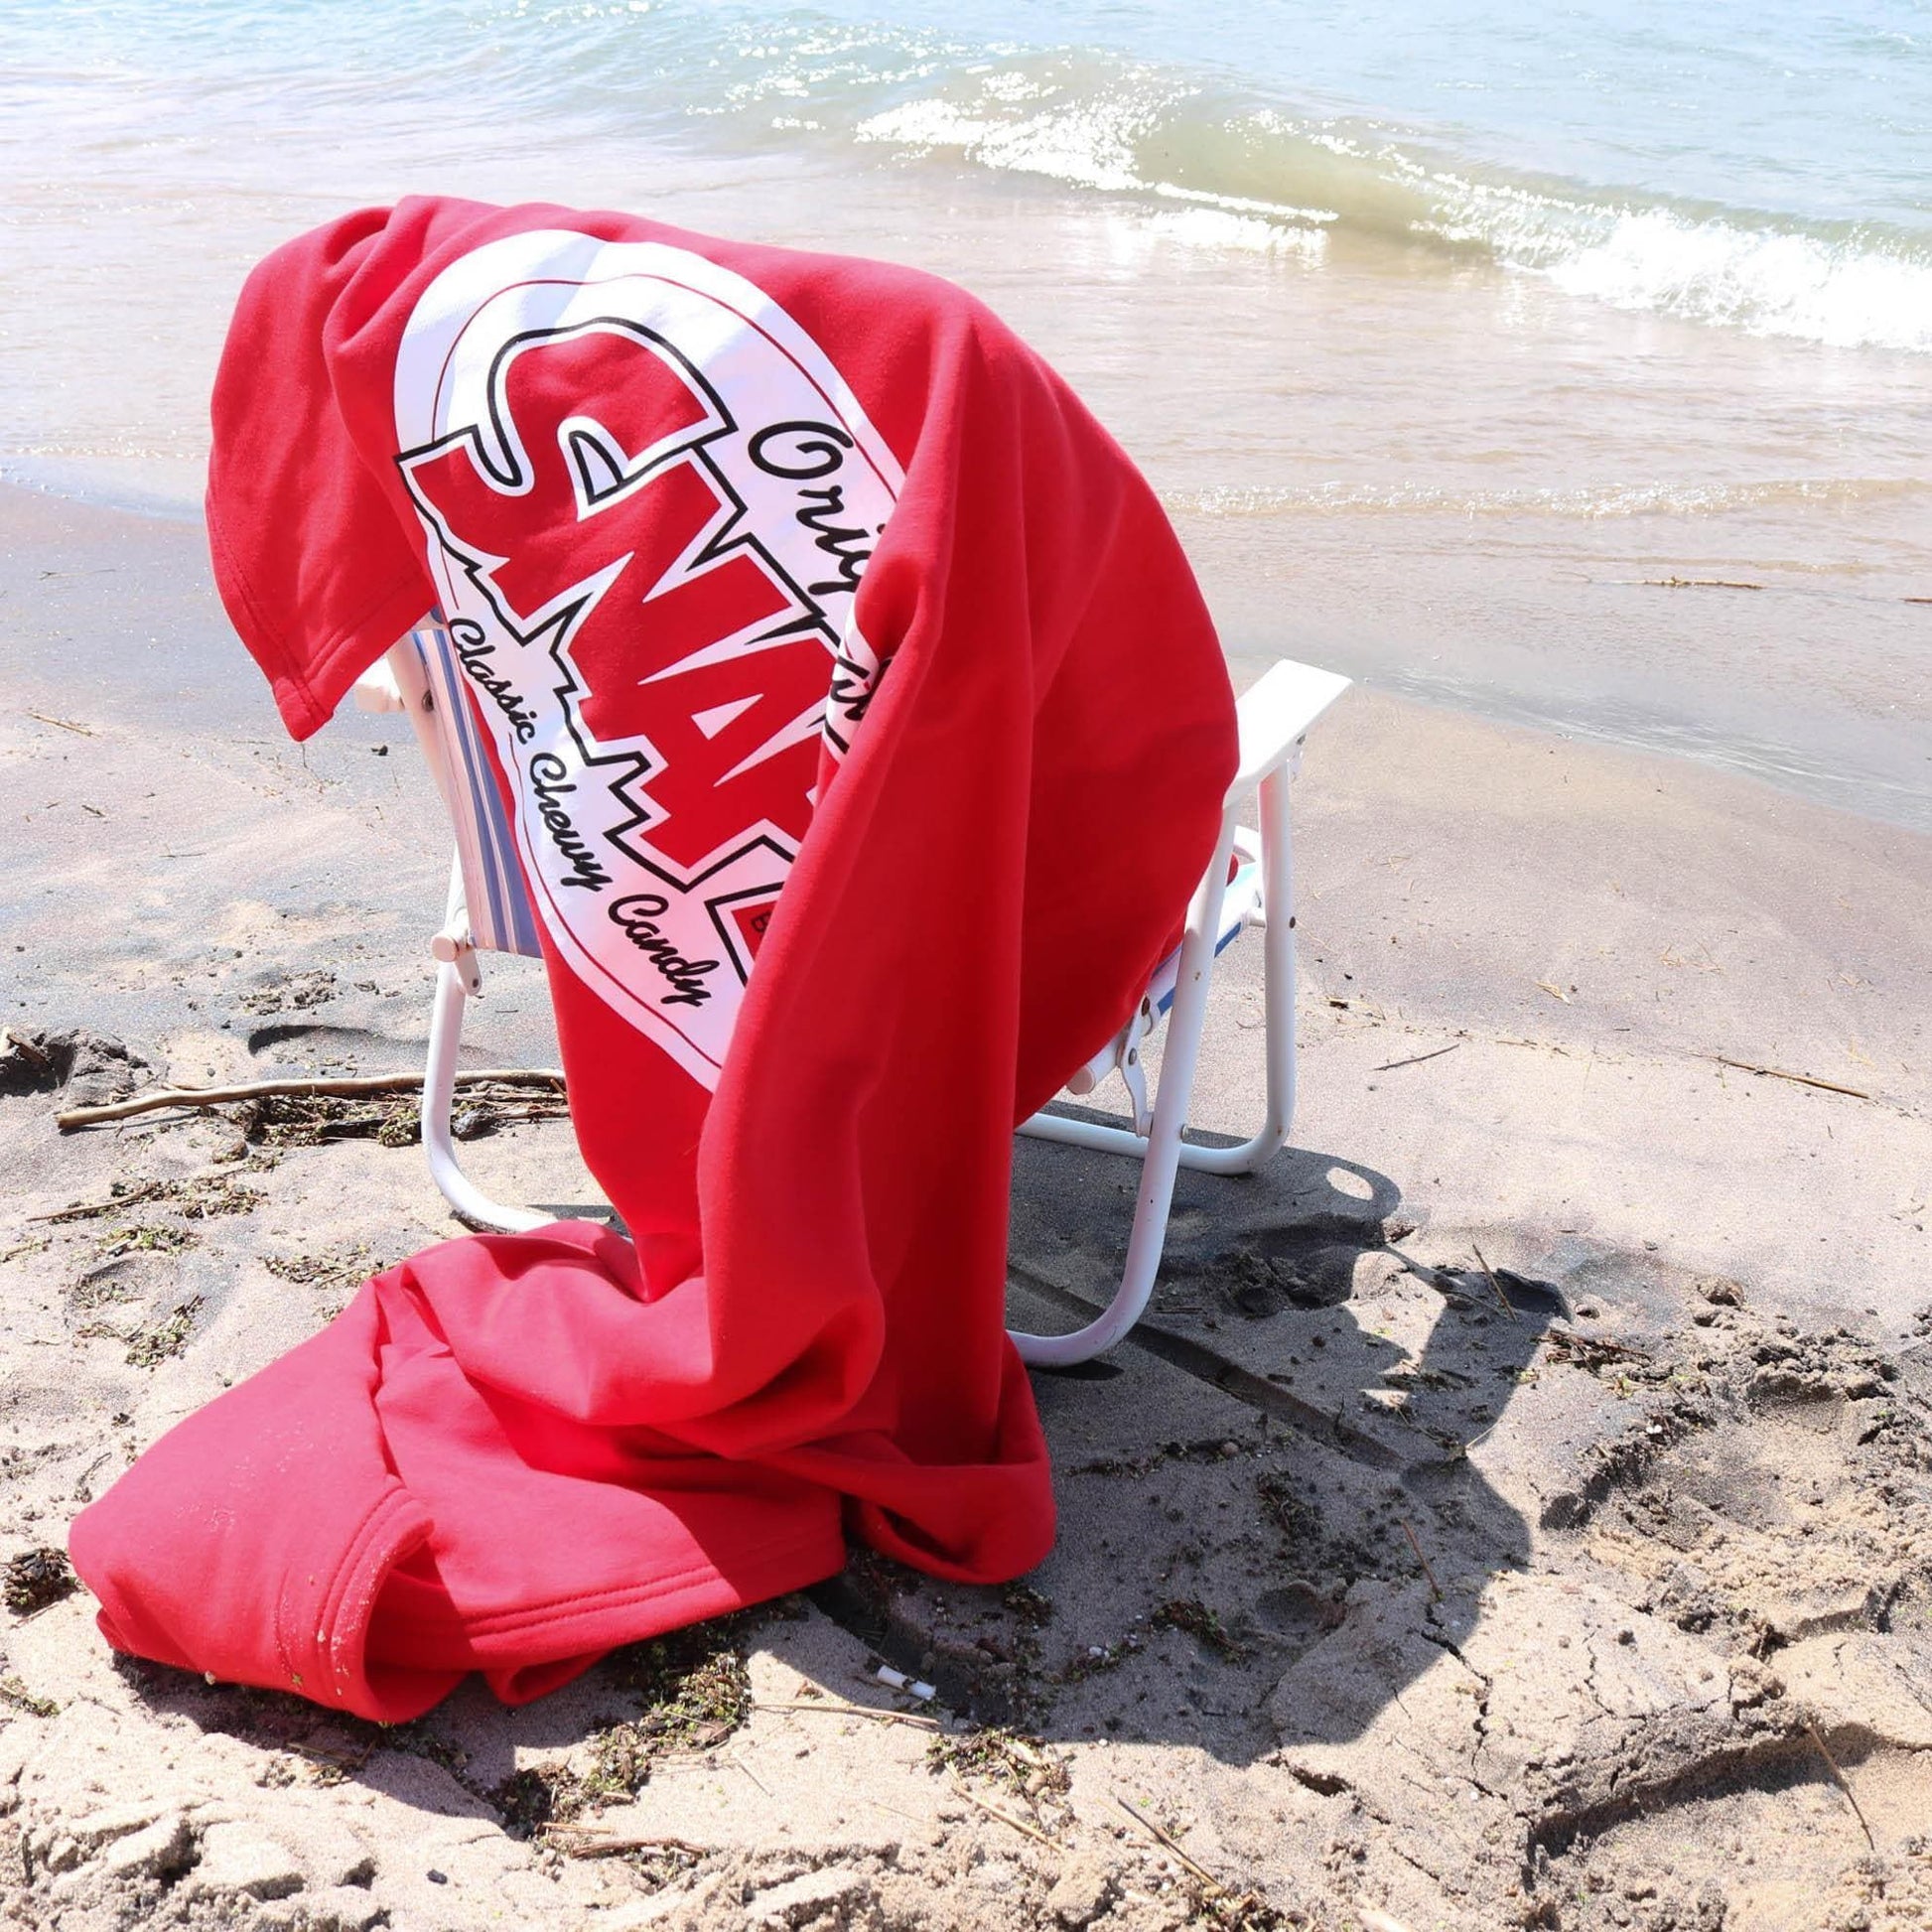 SNAPS Blanket draped across a lawn chair at the beach